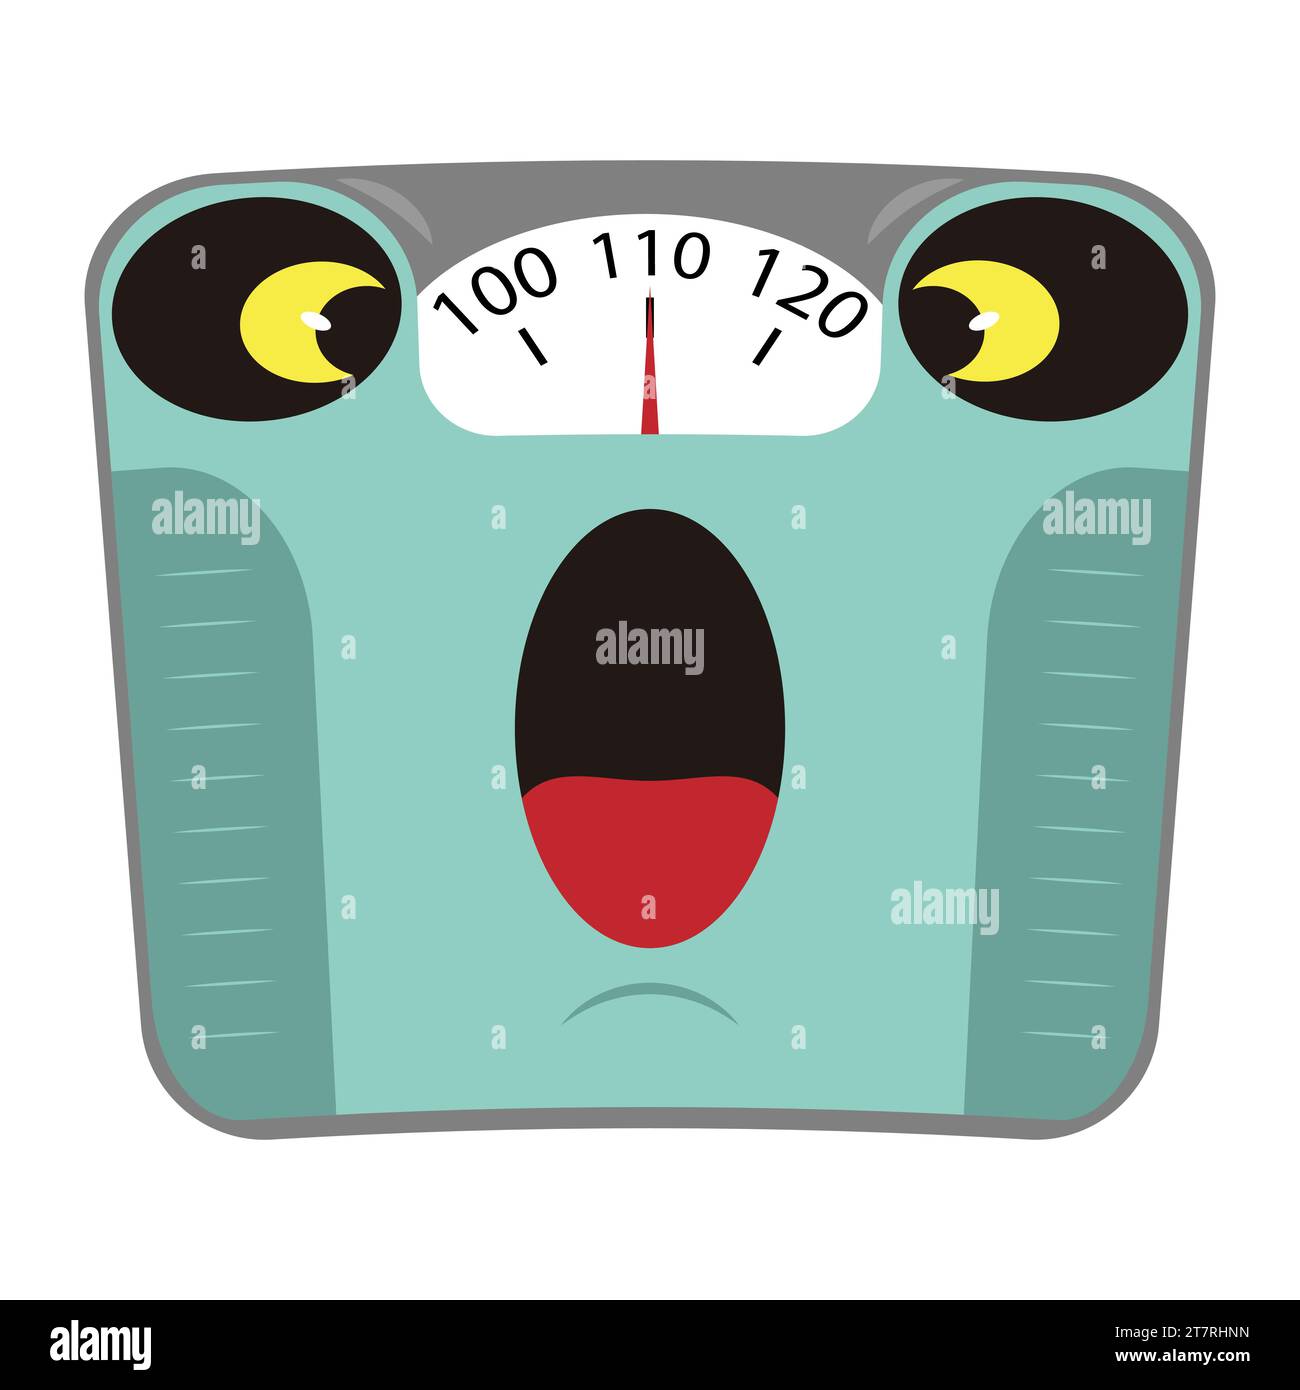 https://c8.alamy.com/comp/2T7RHNN/mechanical-body-weight-scale-with-high-weight-on-the-dial-and-scared-face-cartoon-vector-illustration-2T7RHNN.jpg